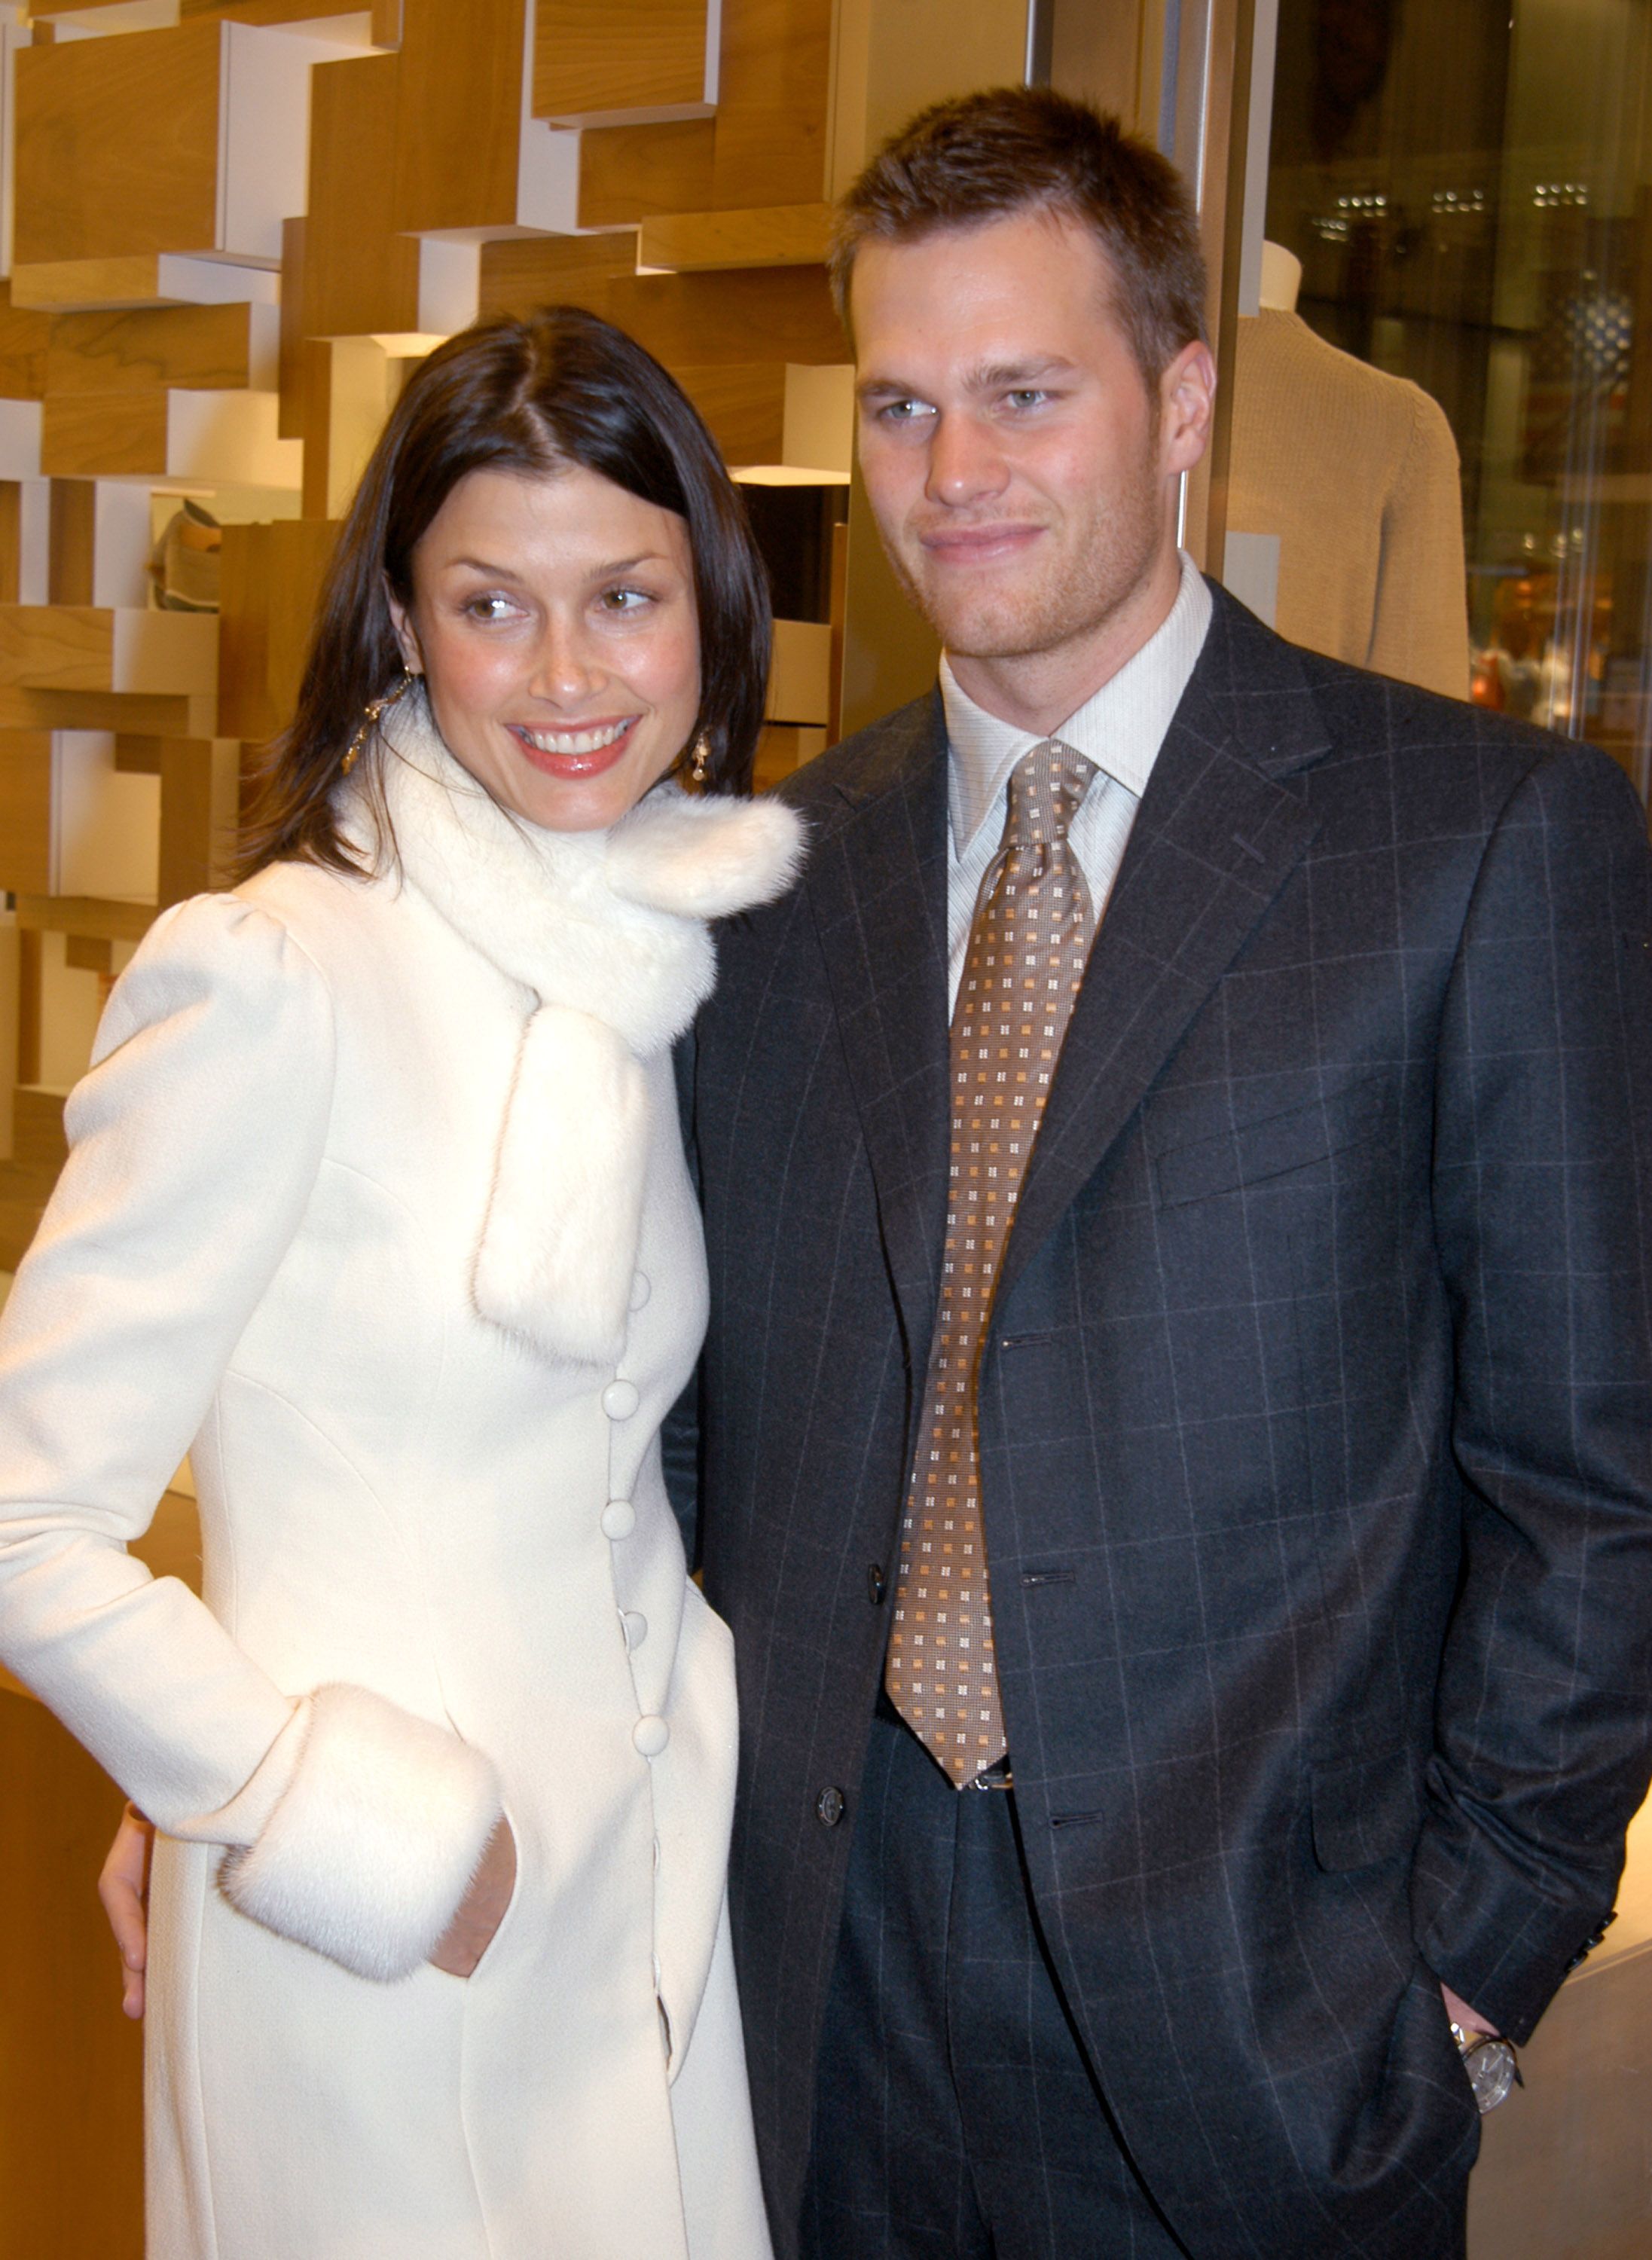 Bridget Moynahan opens up about her split with Tom Brady — and her